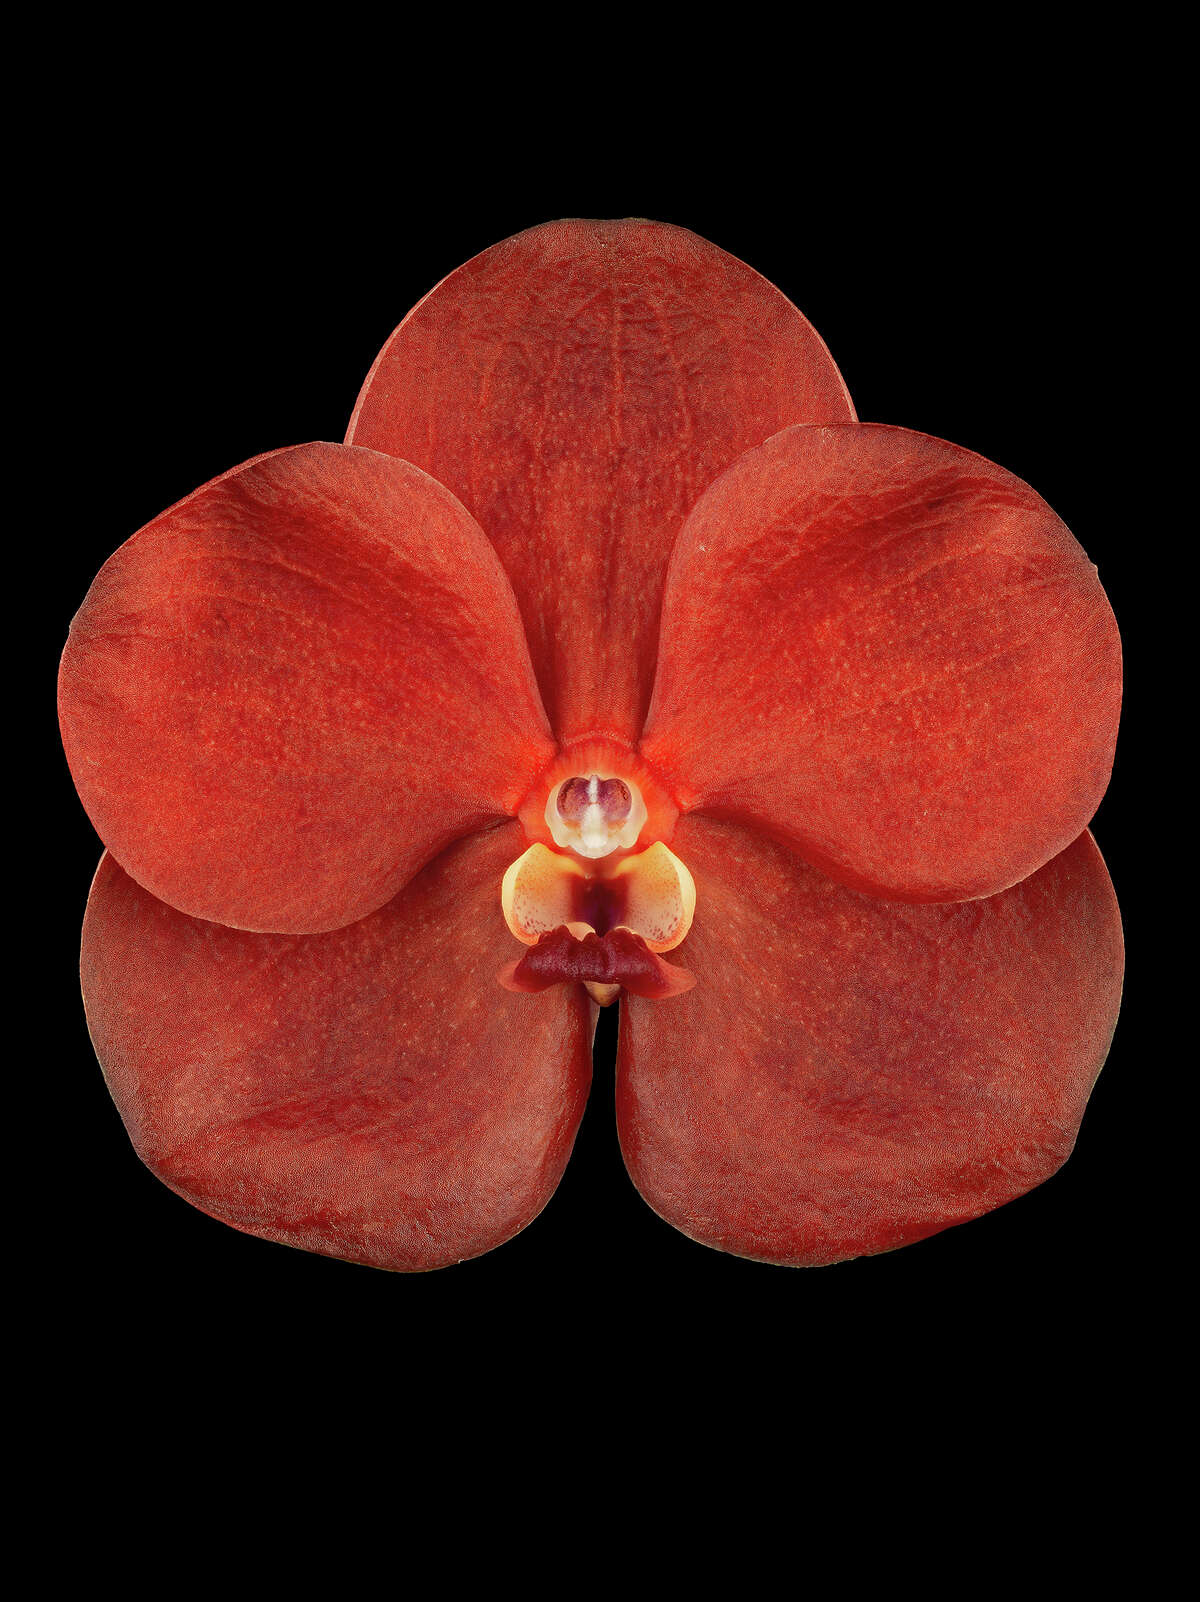 This orchid shot actually is composed of scores of images “stitched” together by computer.